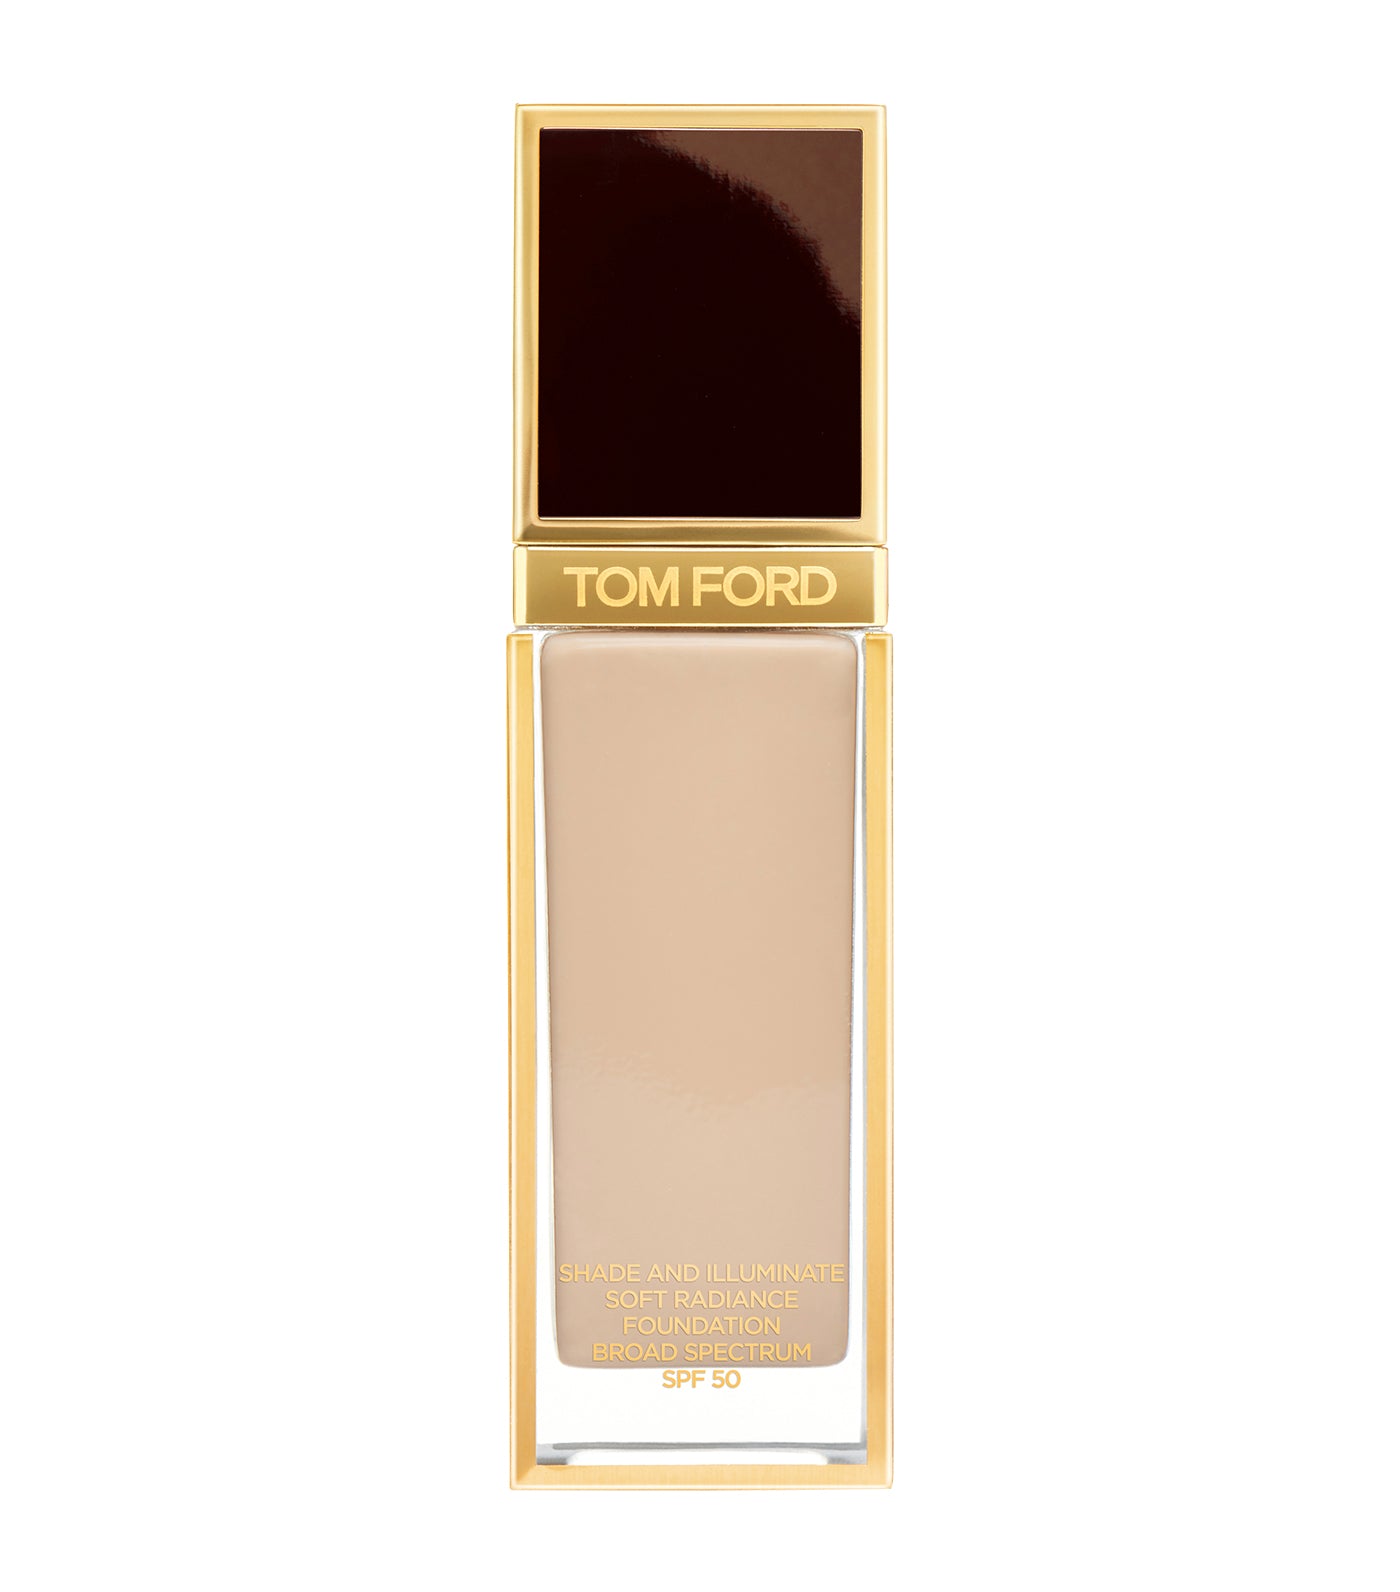 tom ford shade and illuminate soft radiance foundation spf 50/pa++++ fawn